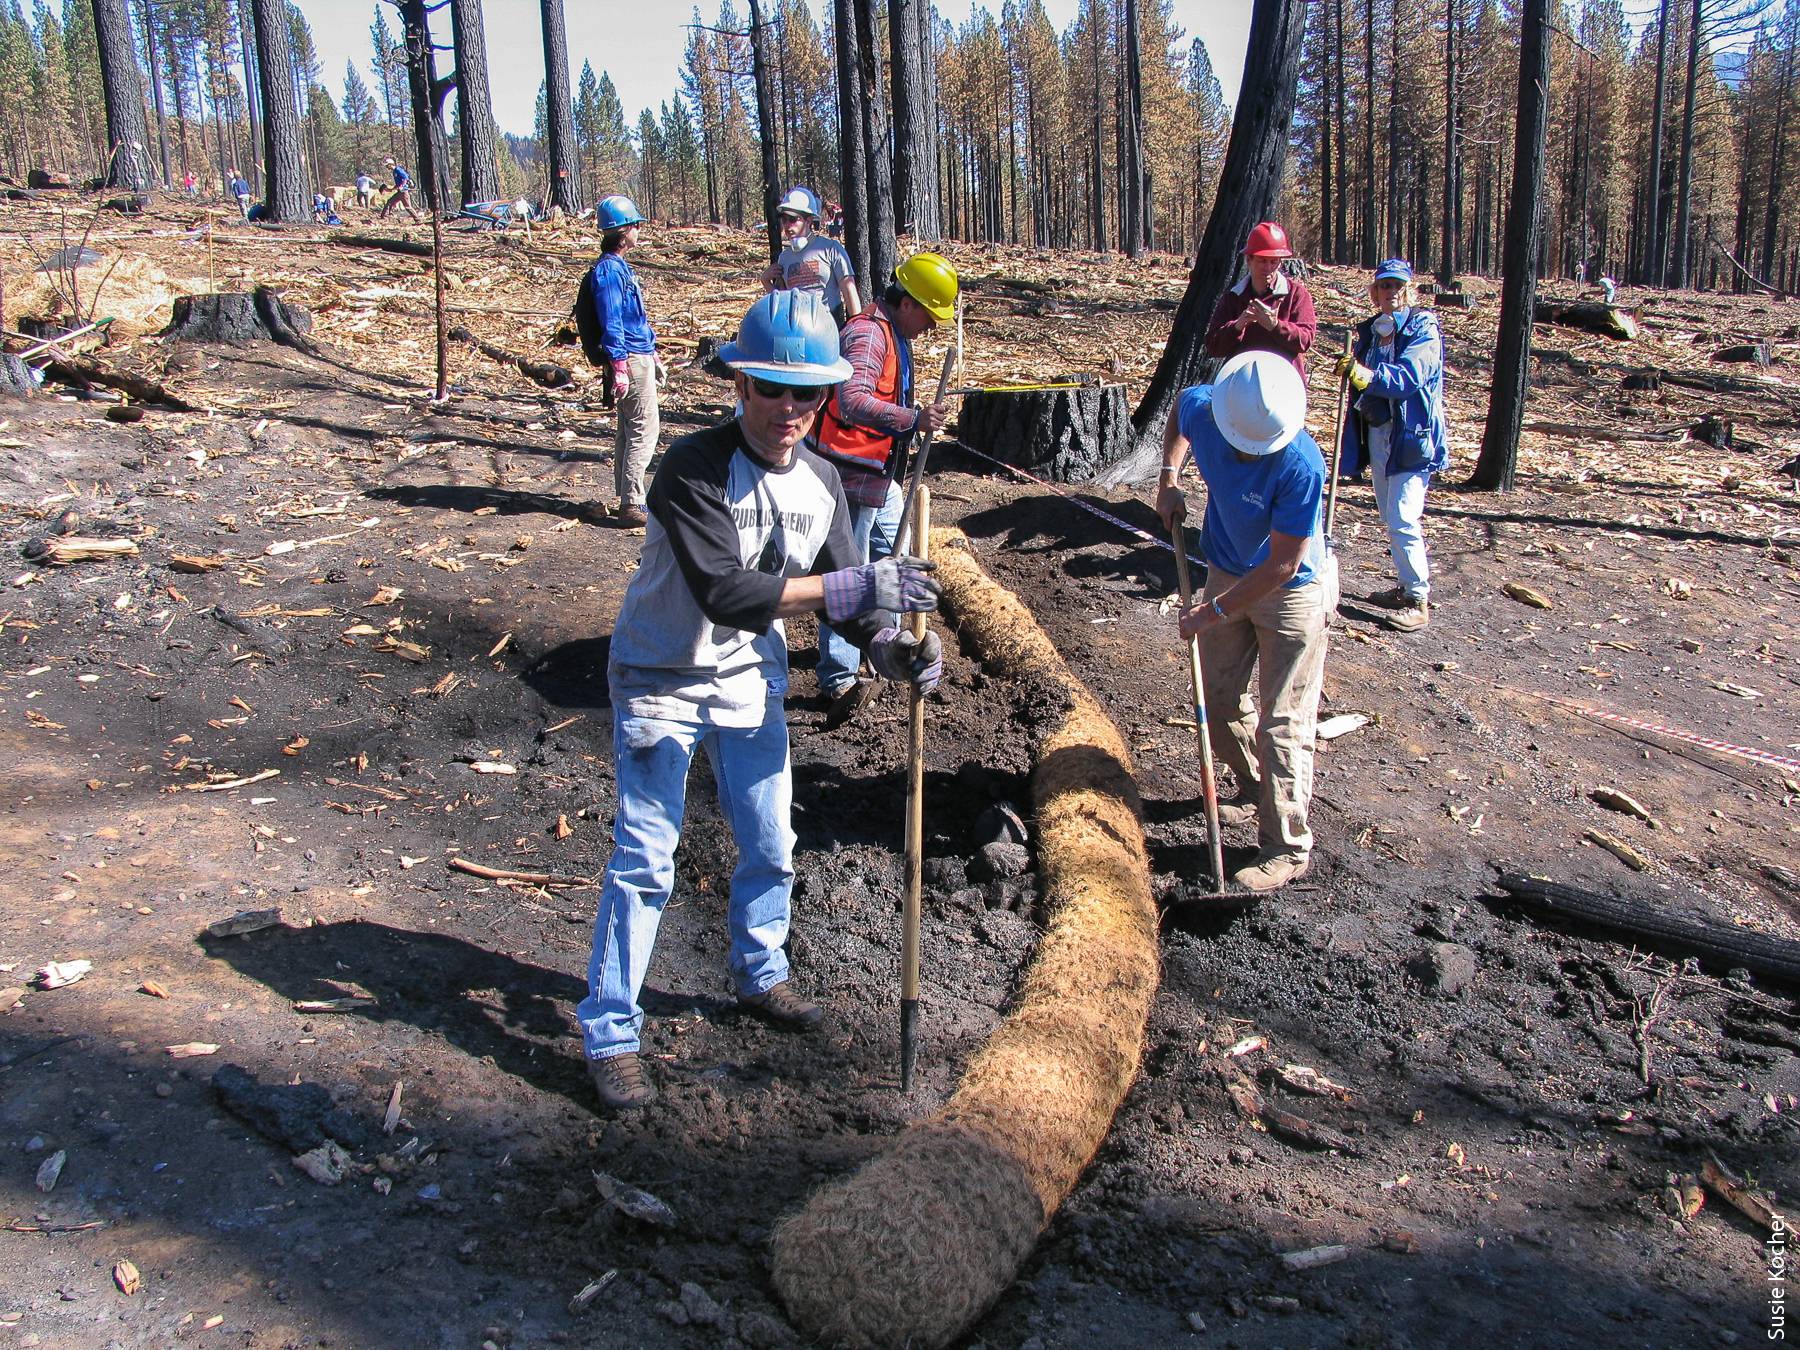 Volunteers for the League to Save Lake Tahoe install erosion control measures following the 2007 Angora fire near South Lake Tahoe. The fire burned 3,100 acres, destroying 250 residences.